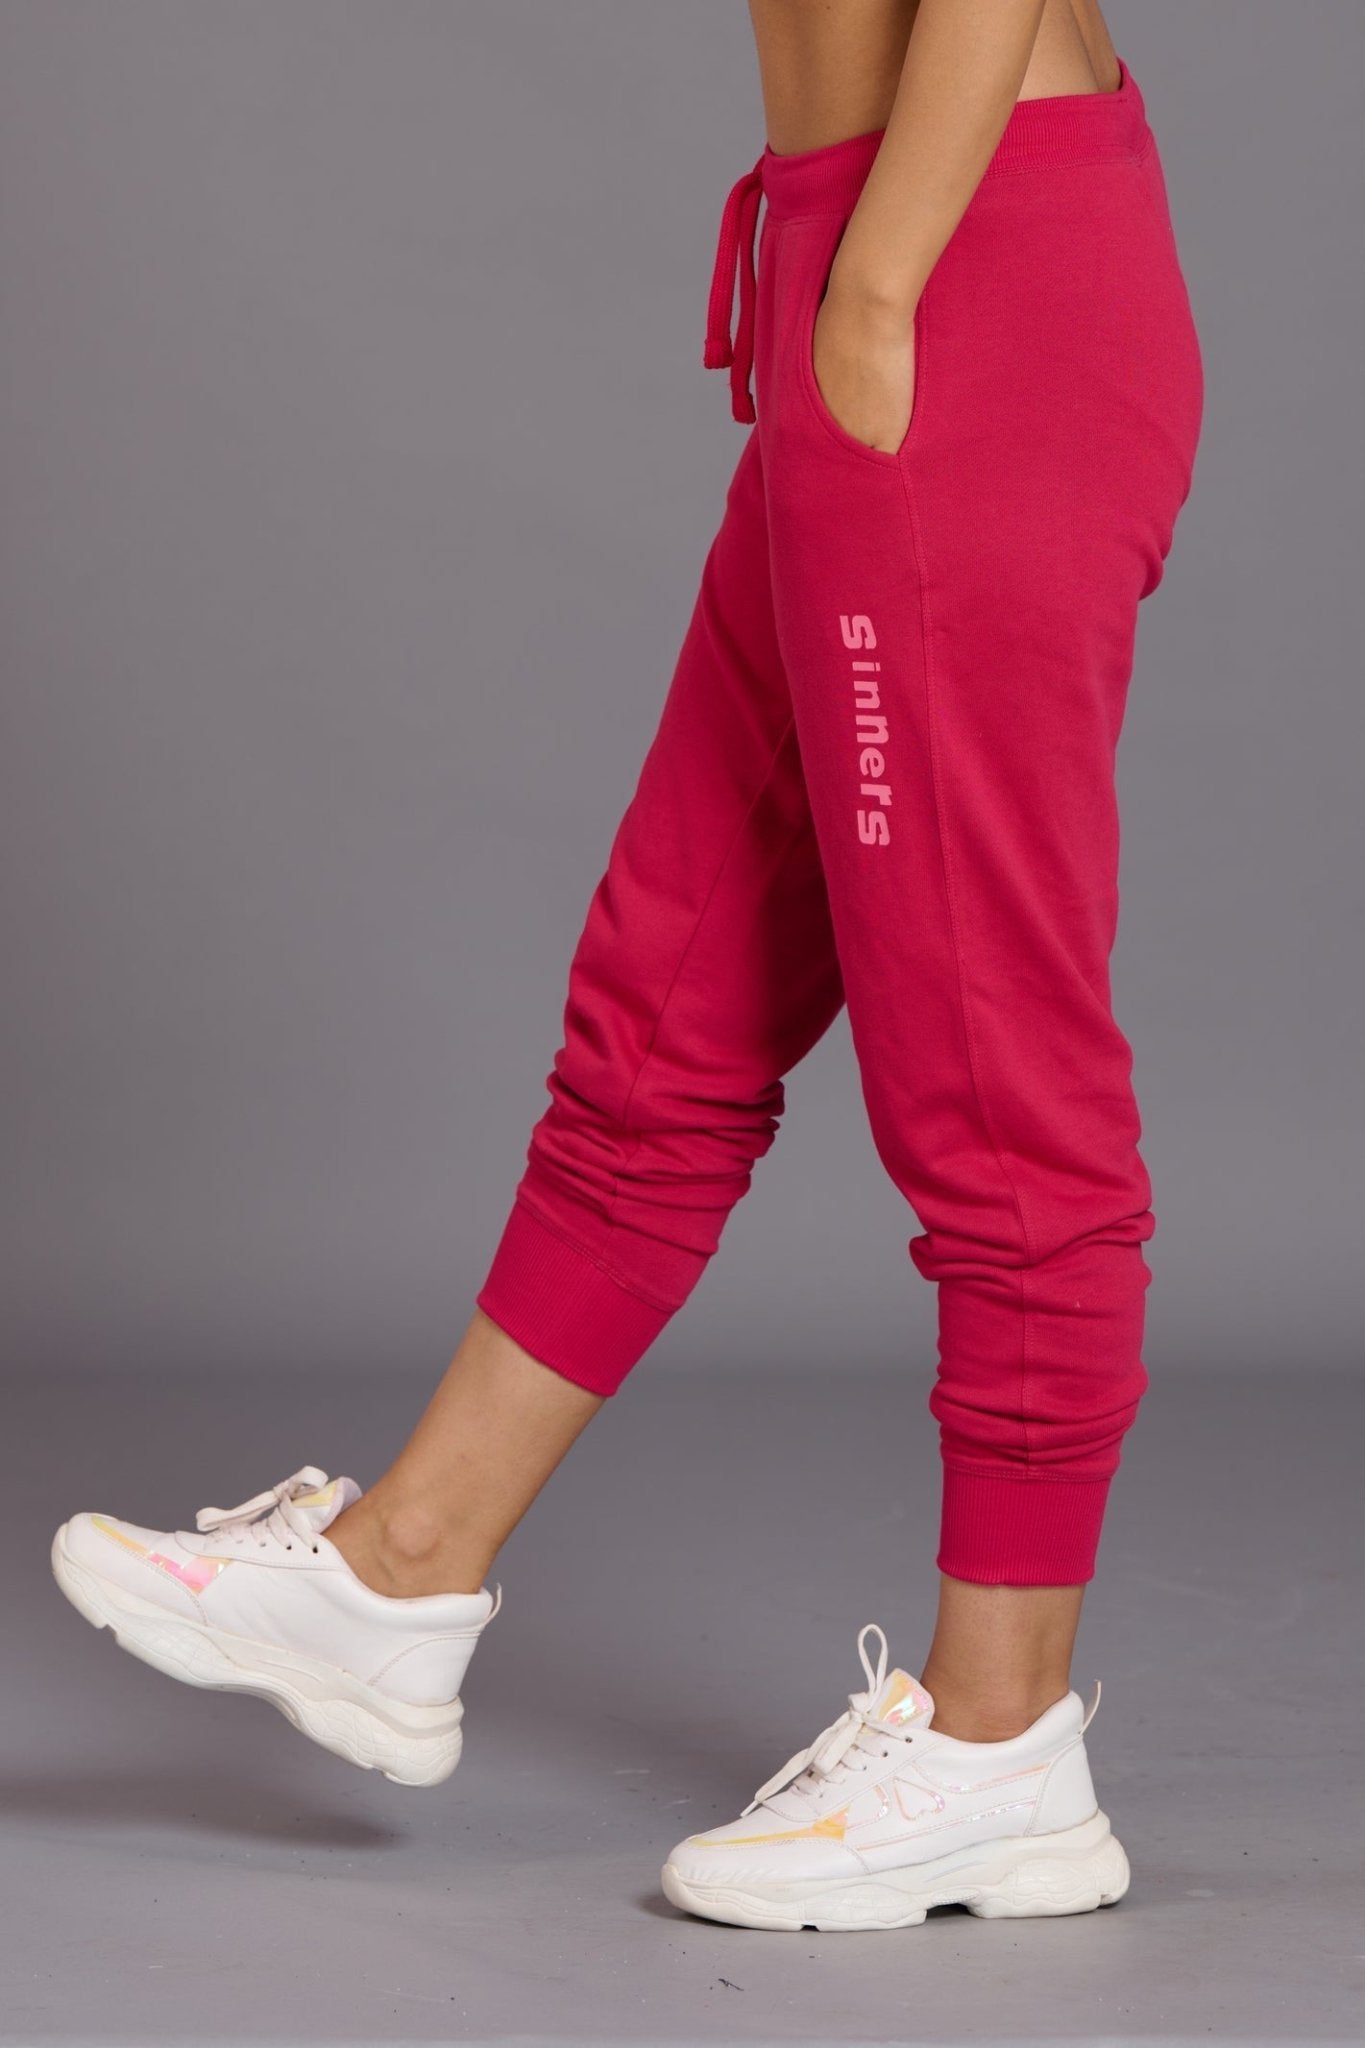 Sinner Printed Pink Cotton Joggers for Women - Go Devil